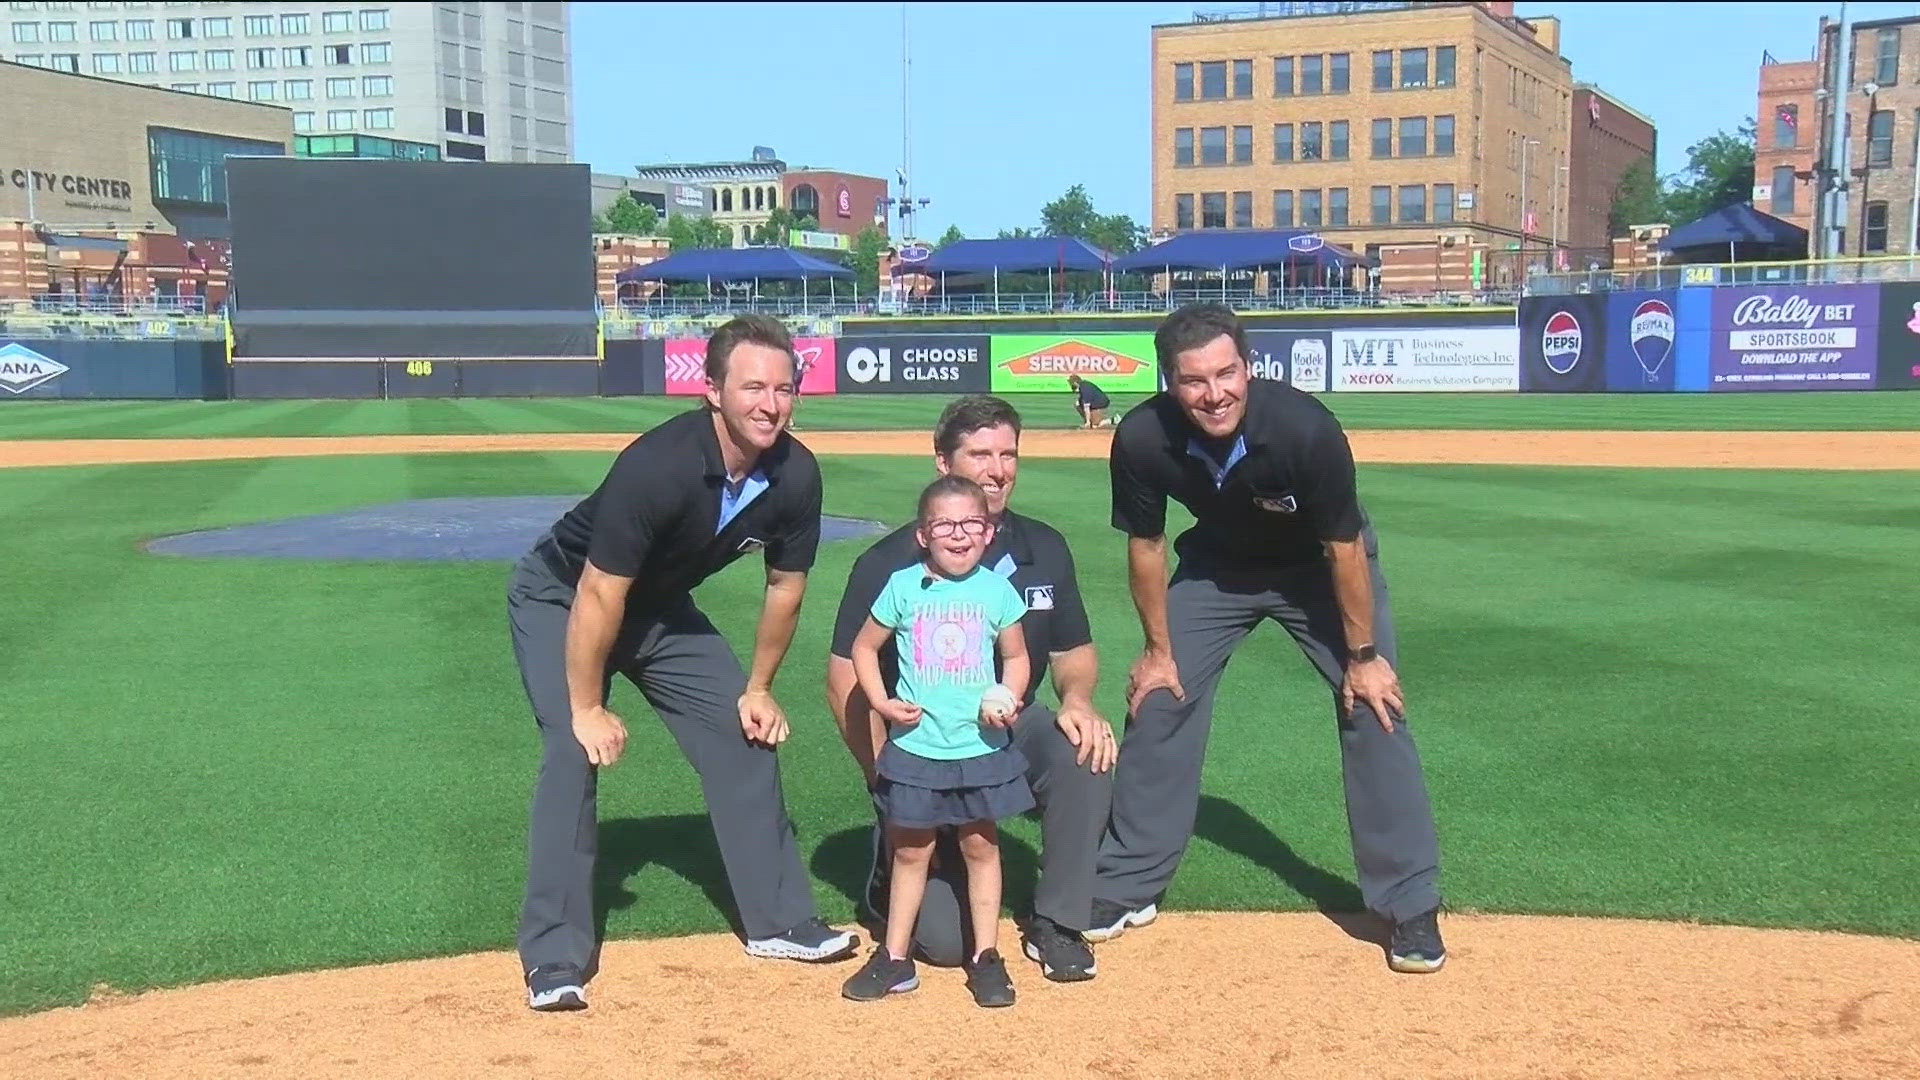 Emmalyn Rowan, 5, got a special behind-the-scenes tour of Fifth Third Field with its umpires. It's something her family wouldn't have imagined just a few years ago.